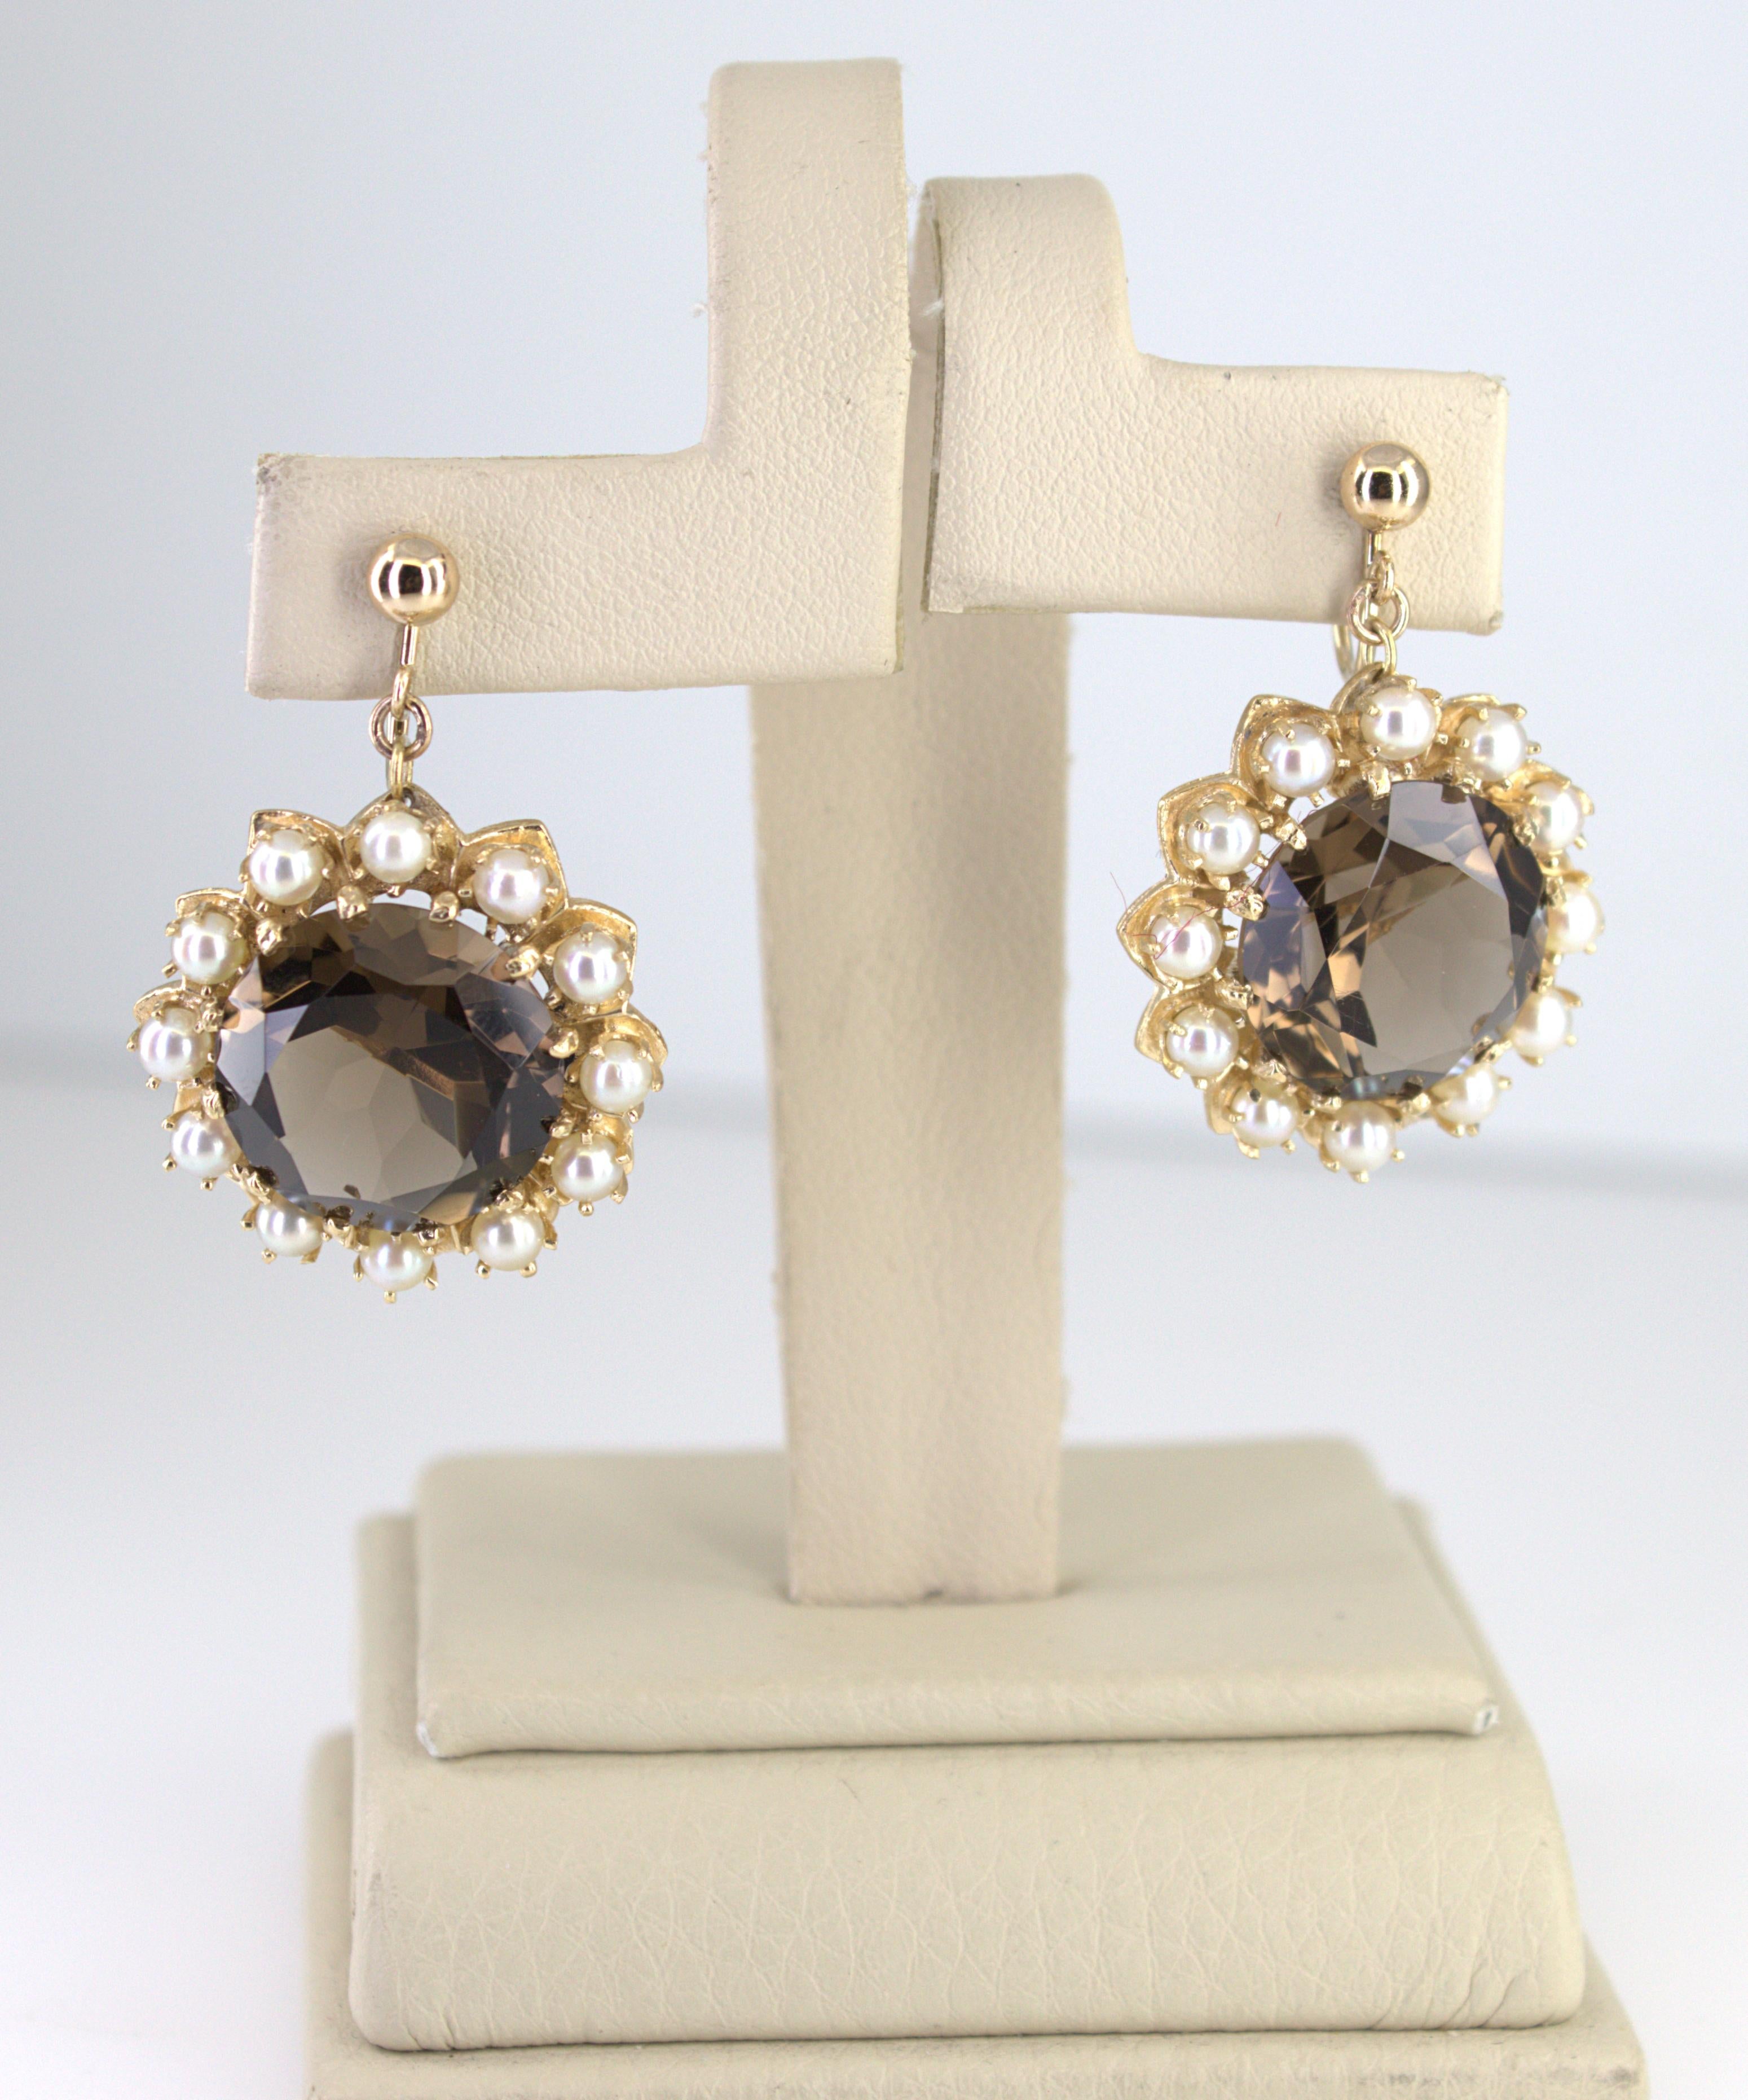 Pair of Smokey Quartz, Cultured Pearl, 14K Yellow Gold Earrings For Sale 1